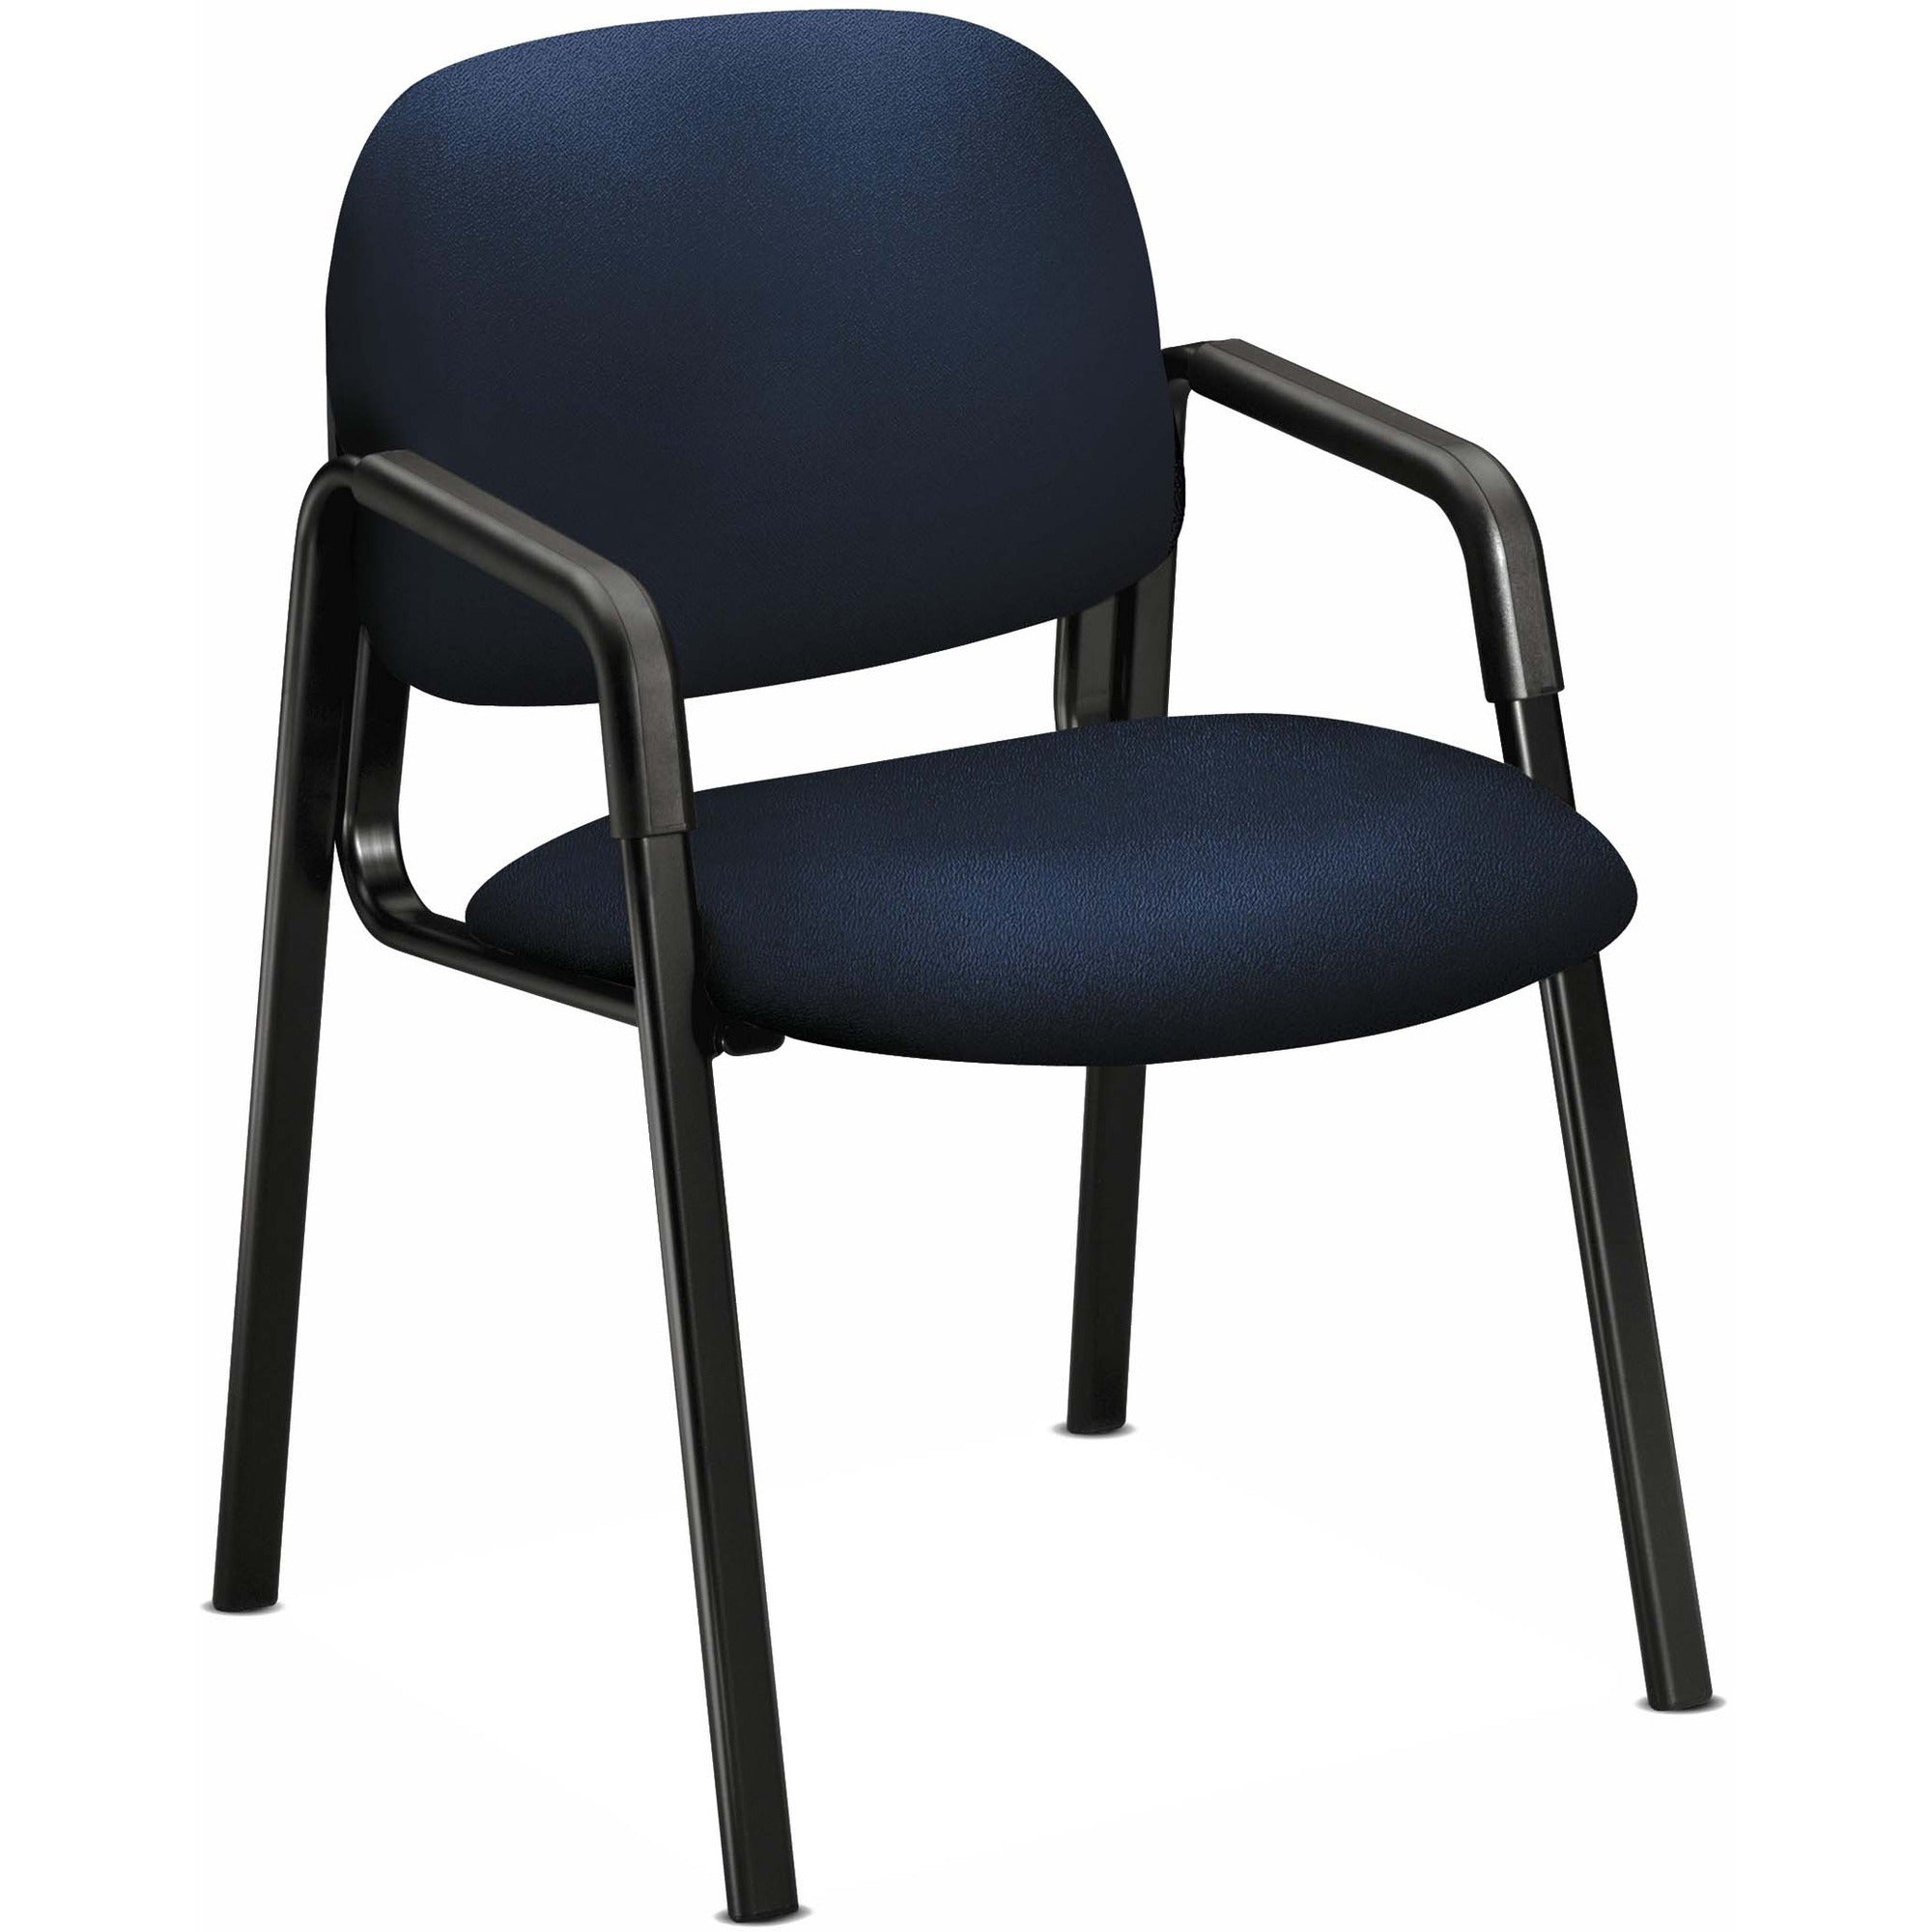 hon-solutions-seating-4000-chair-navy-seat-navy-fabric-back-black-frame-navy-armrest_hon4003cu98t - 1